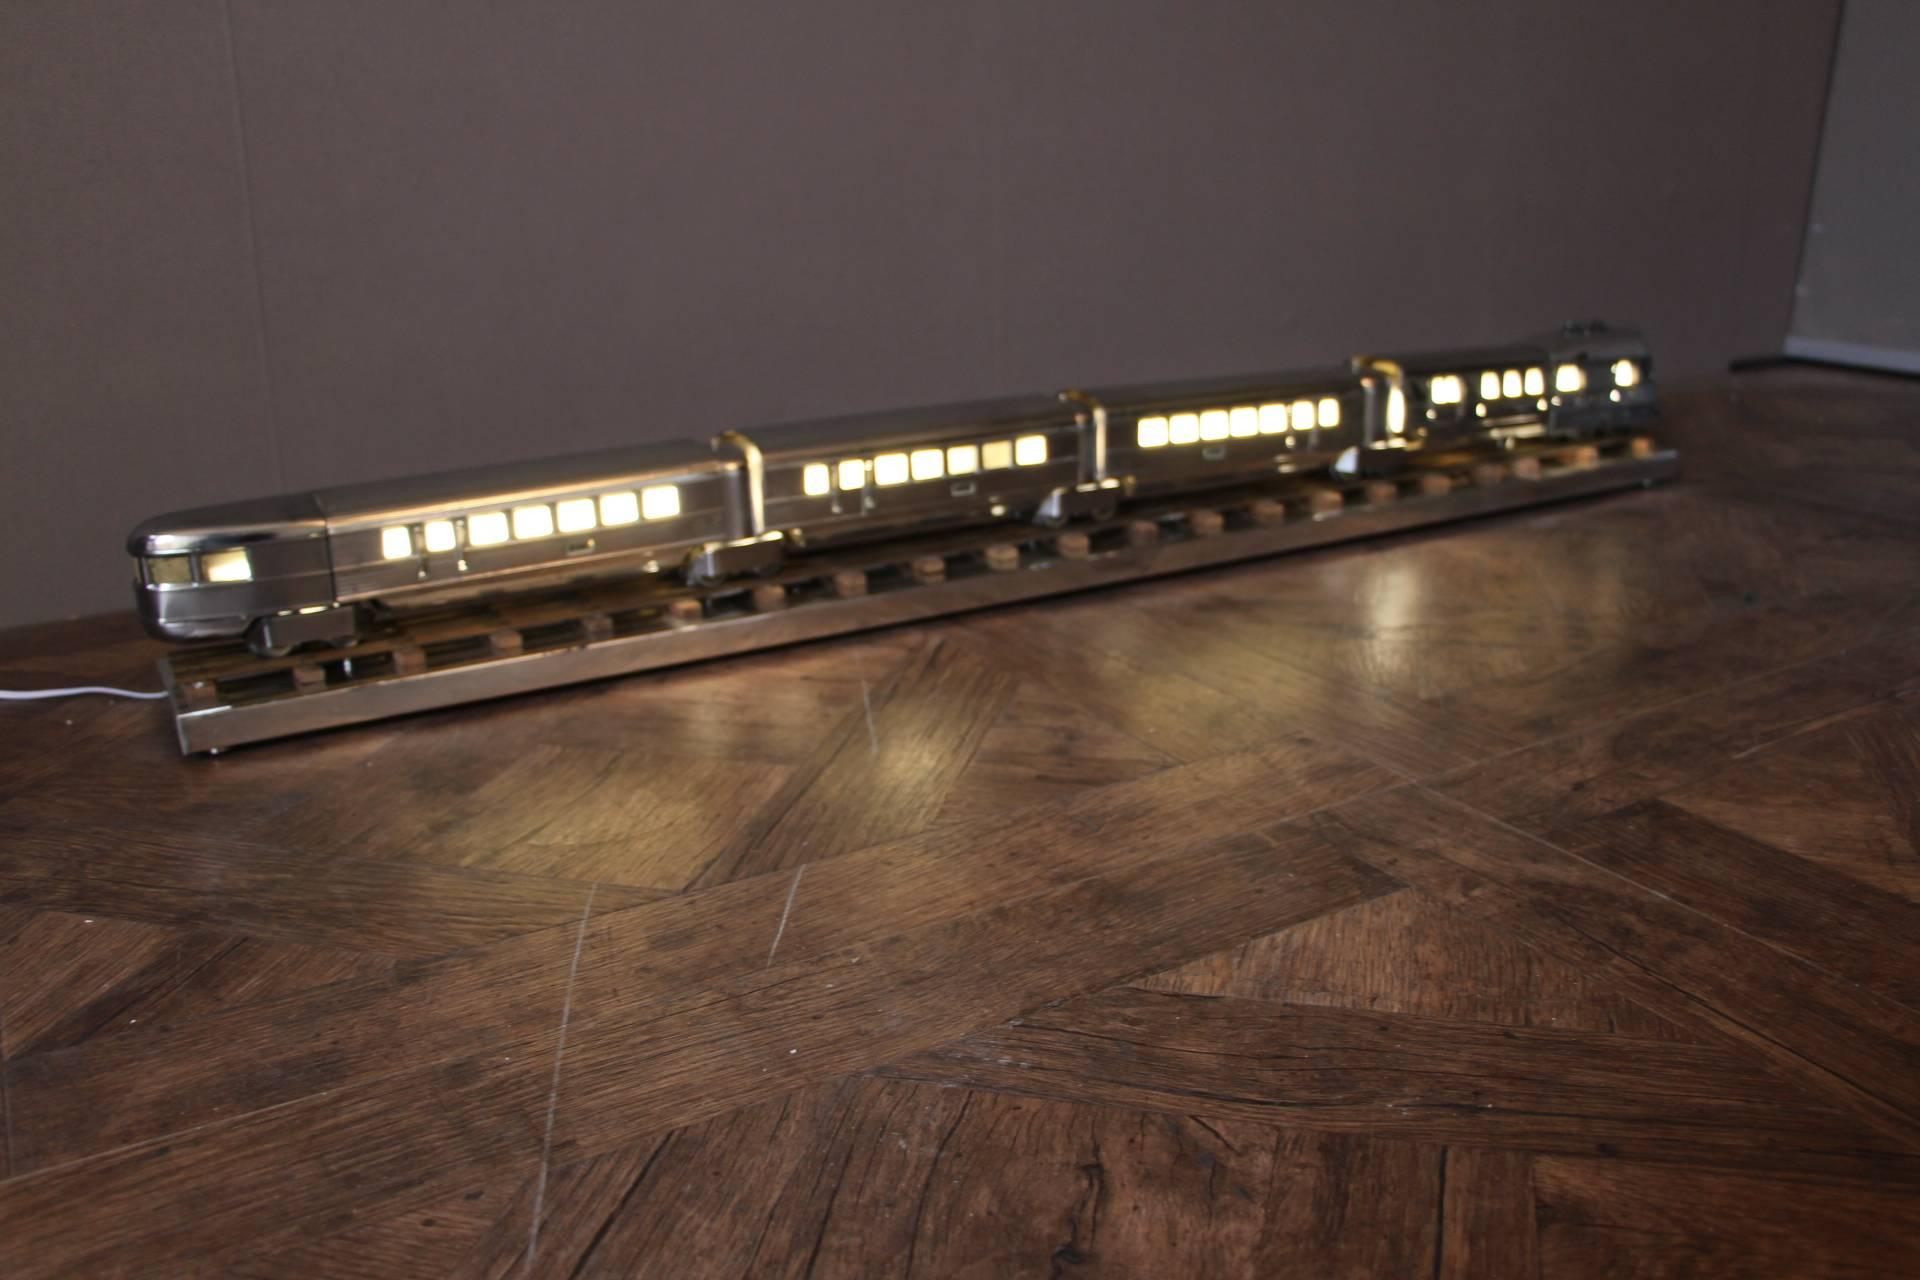 This polished aluminium train is fitted with LED lights inside and makes a spectacular and beautiful lamp.
It is a very unusual piece that can be placed in an office, a living room or even in a bedroom.
It is fixed on its polished aluminium Stand